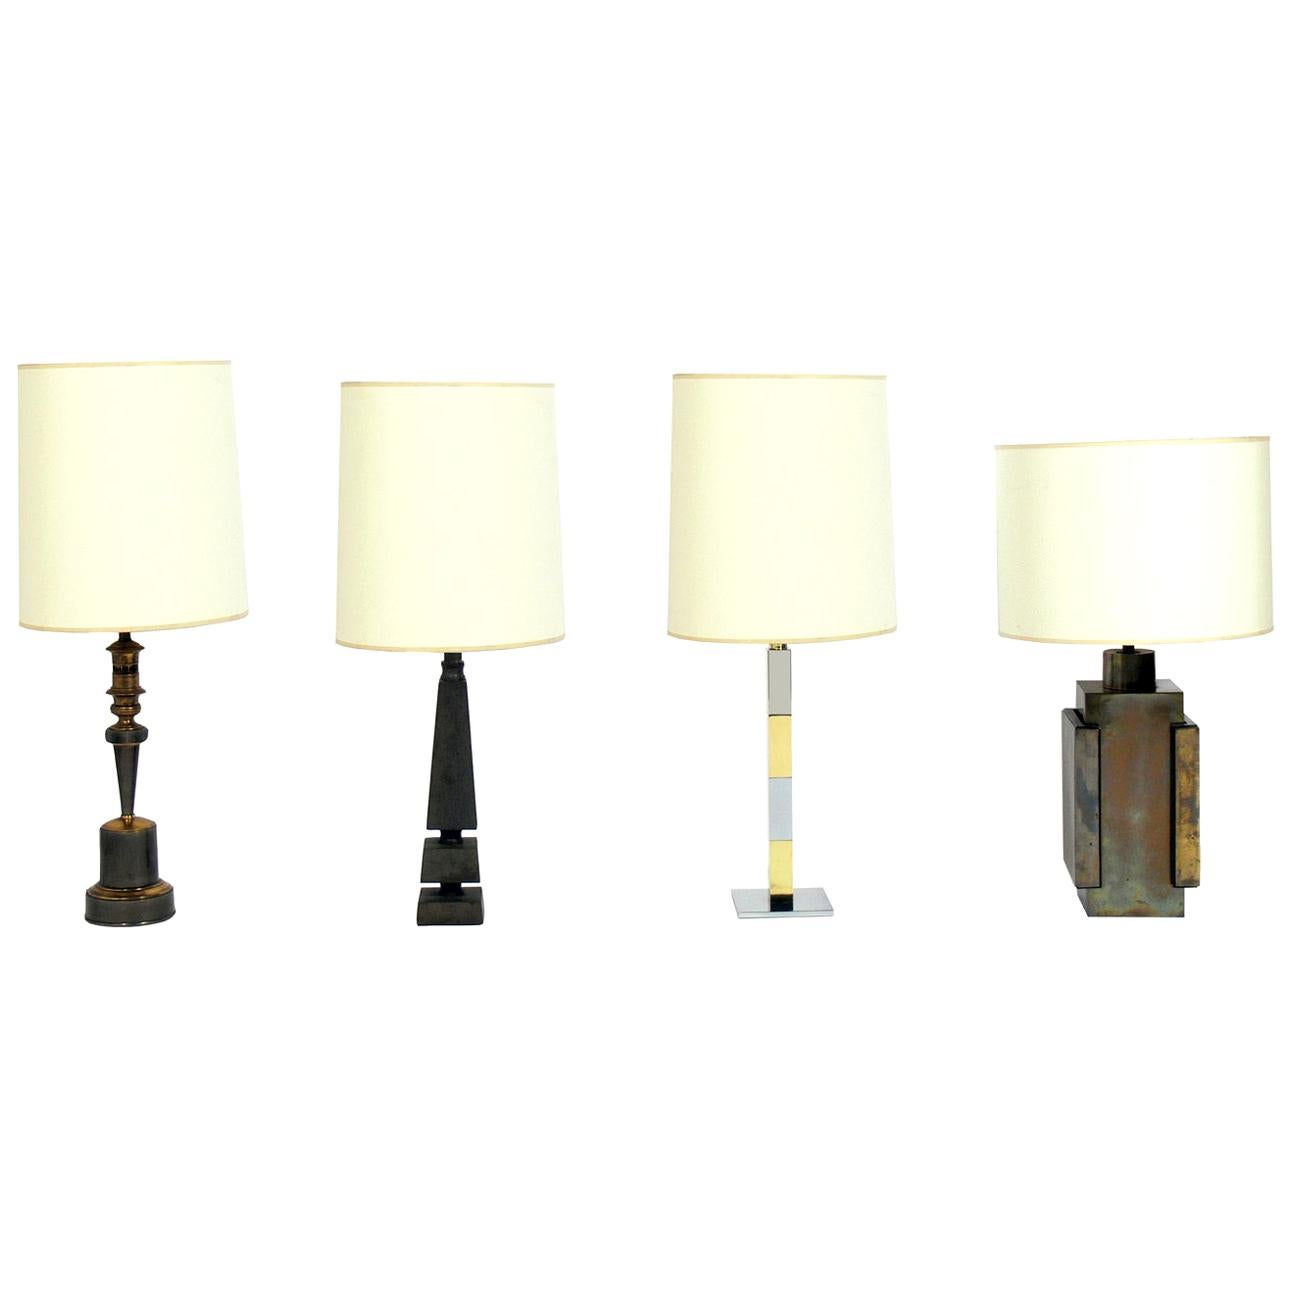 Selection of Mid-Century Modern Brass Lamps